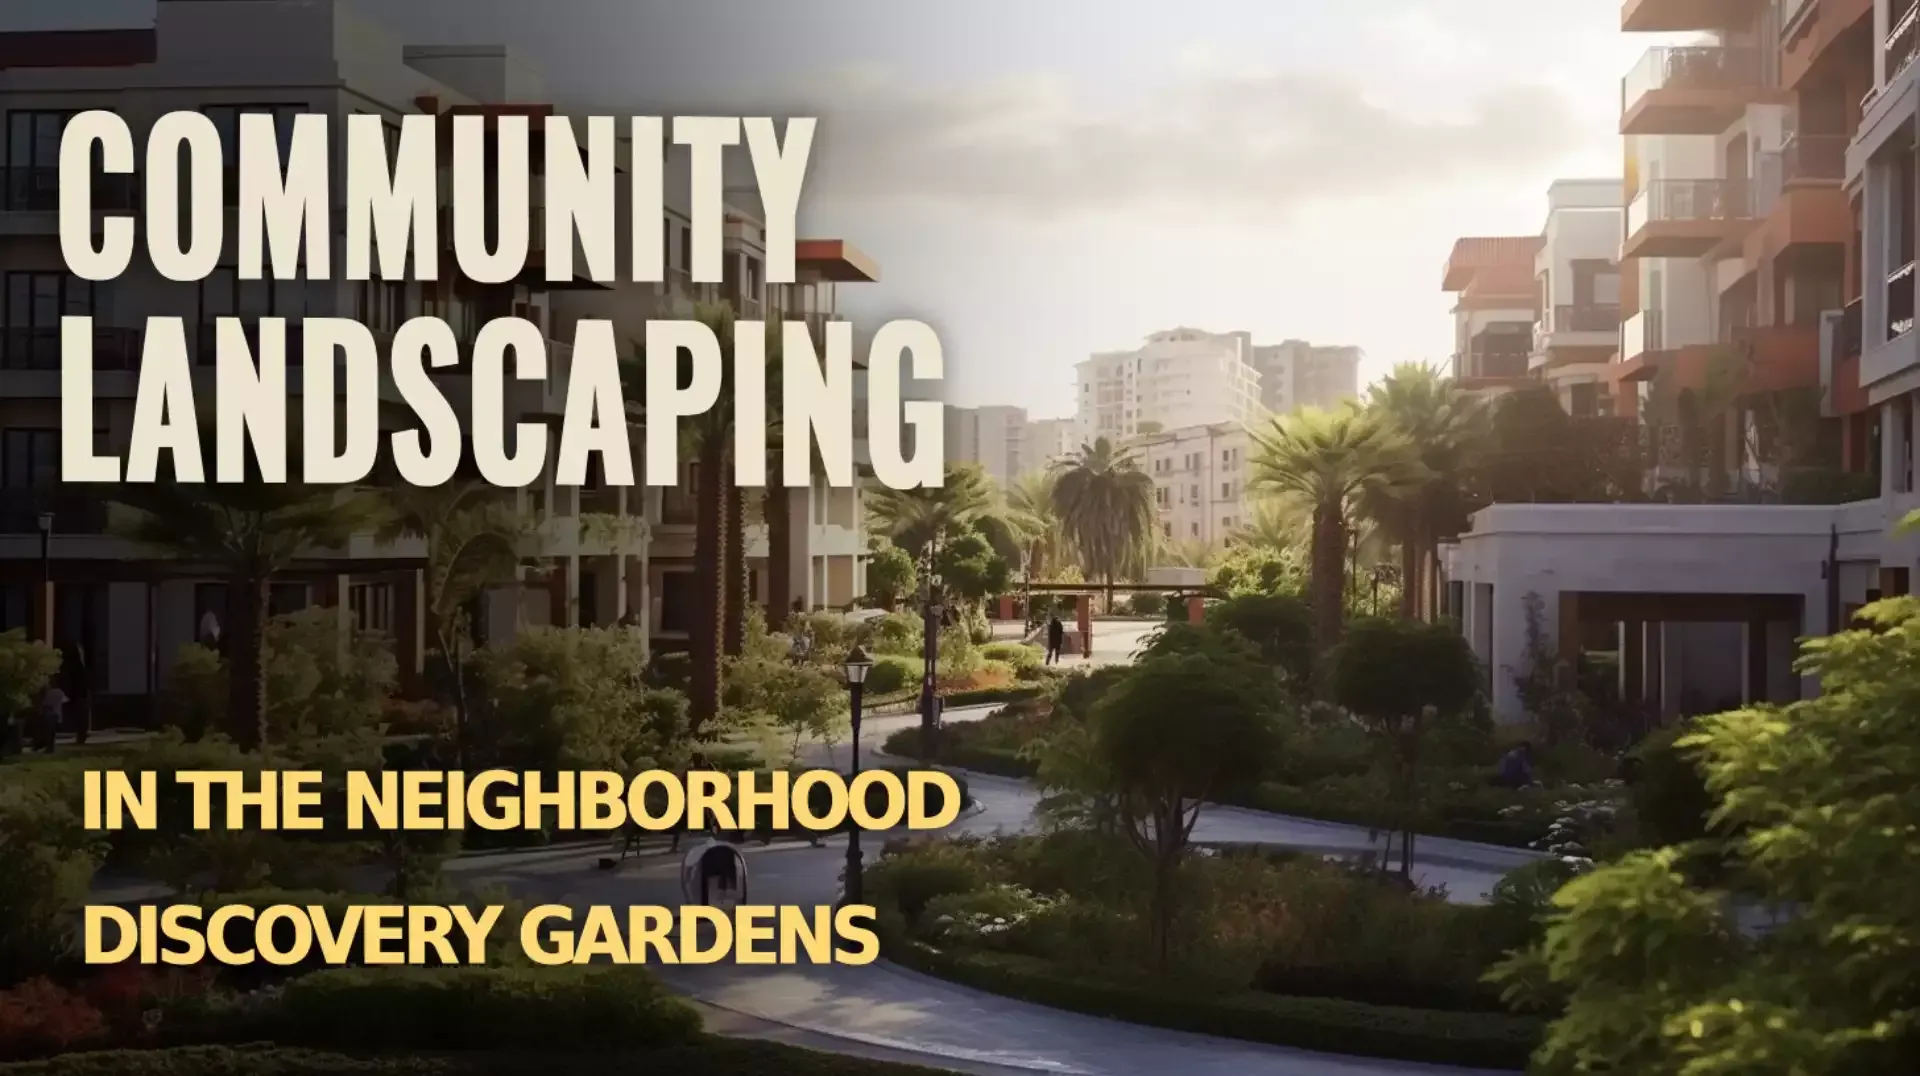 Scenic Beauty: Community Landscaping in Discovery Gardens